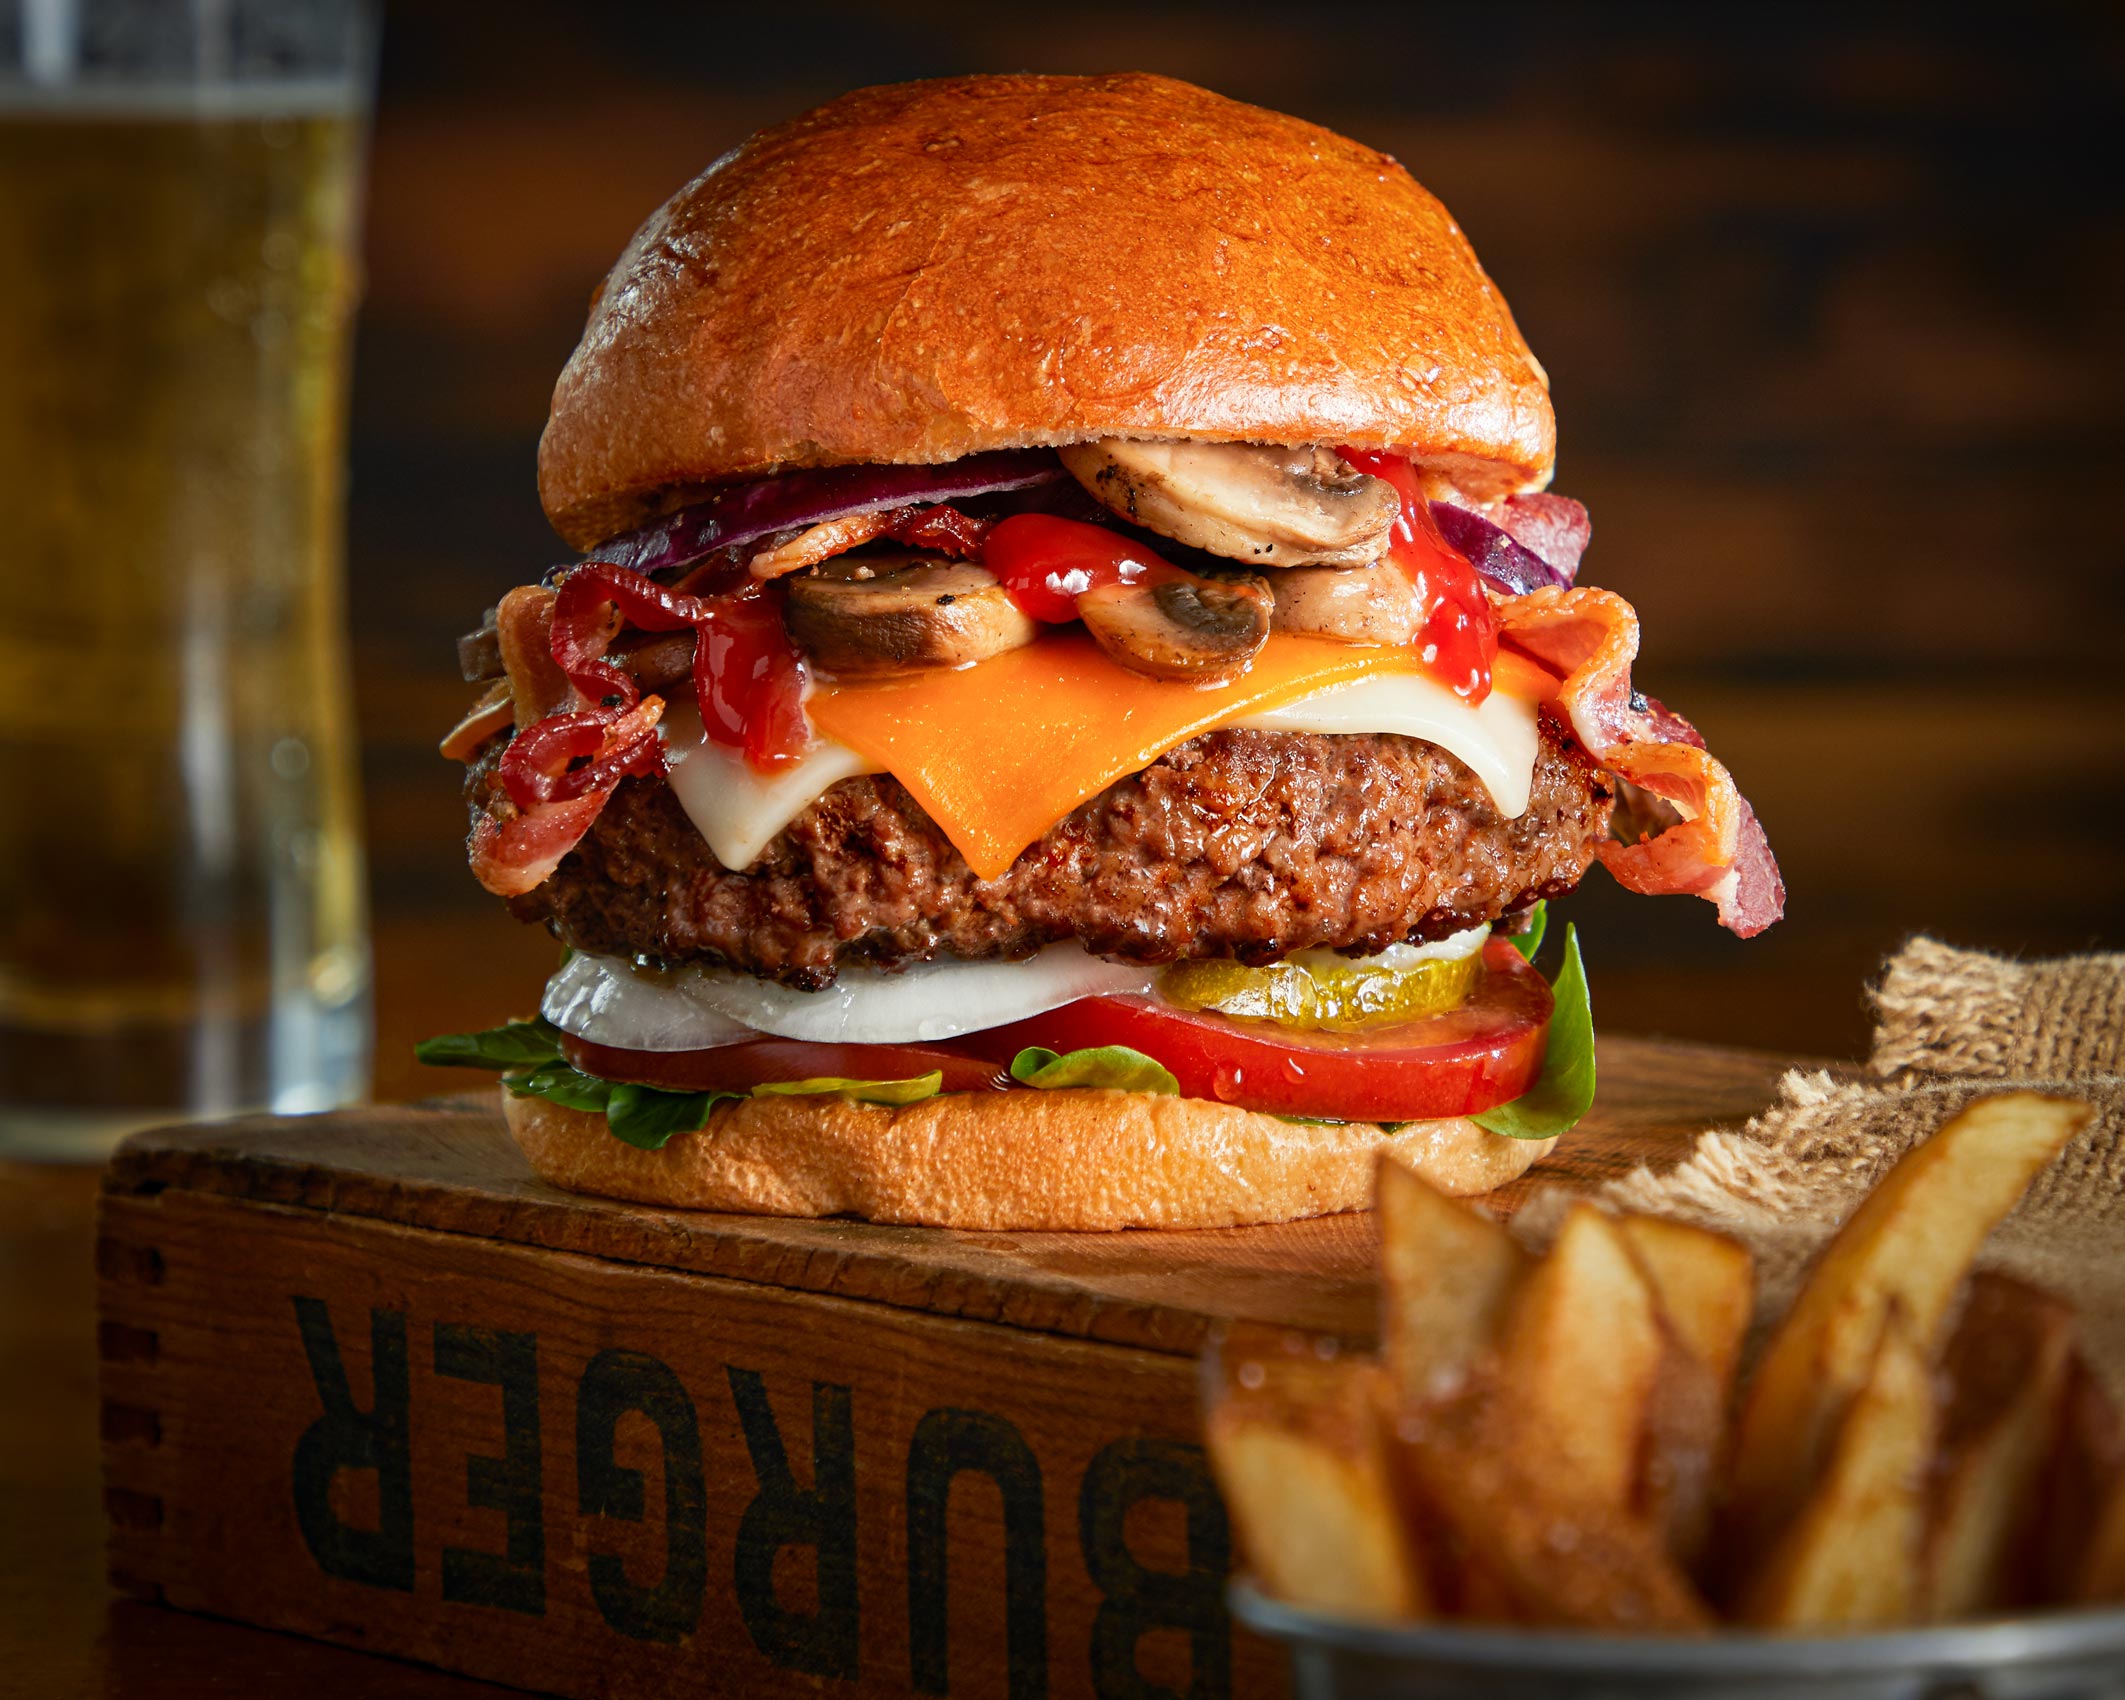 Pub style cheese burger on a dark wood background.